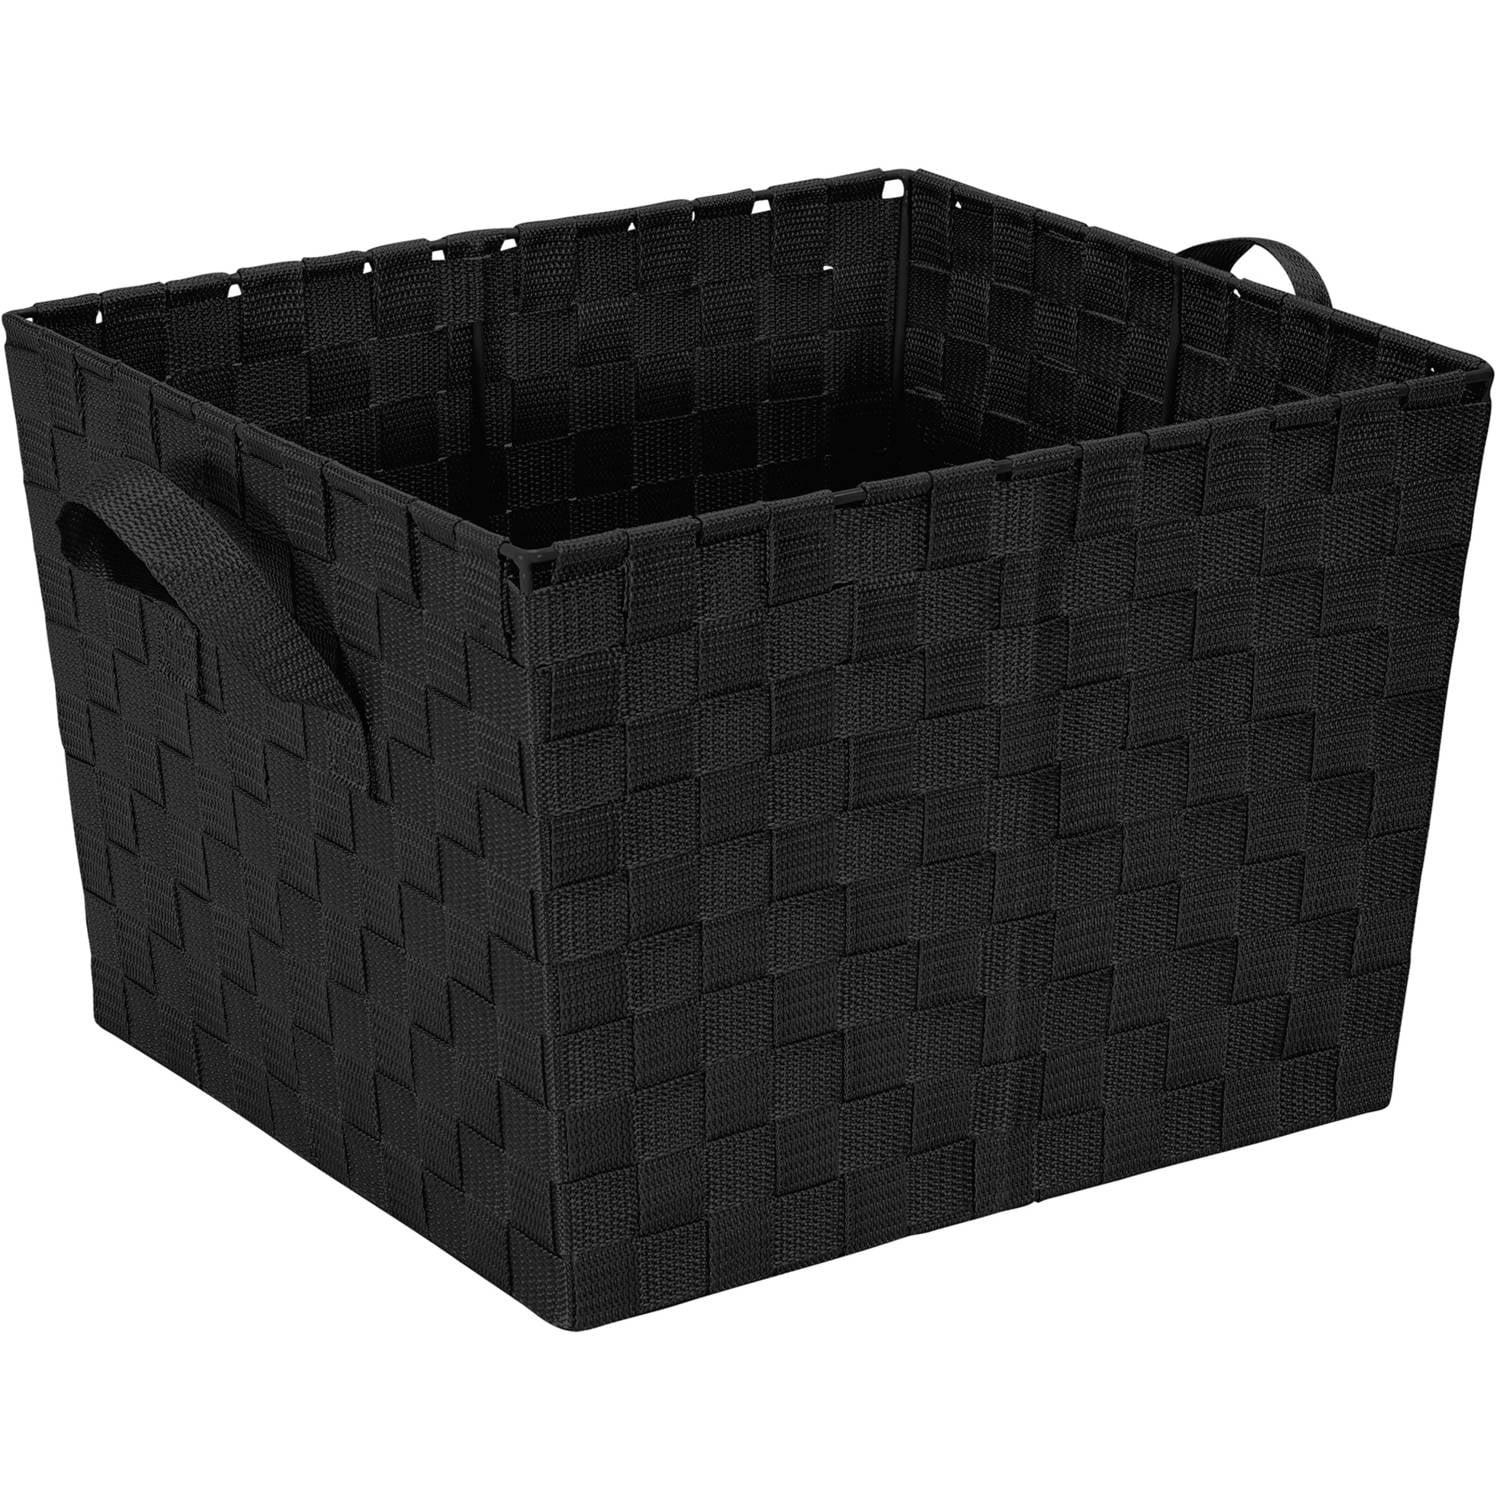 Large Black Woven Polypropylene Storage Tote with Strap Handles